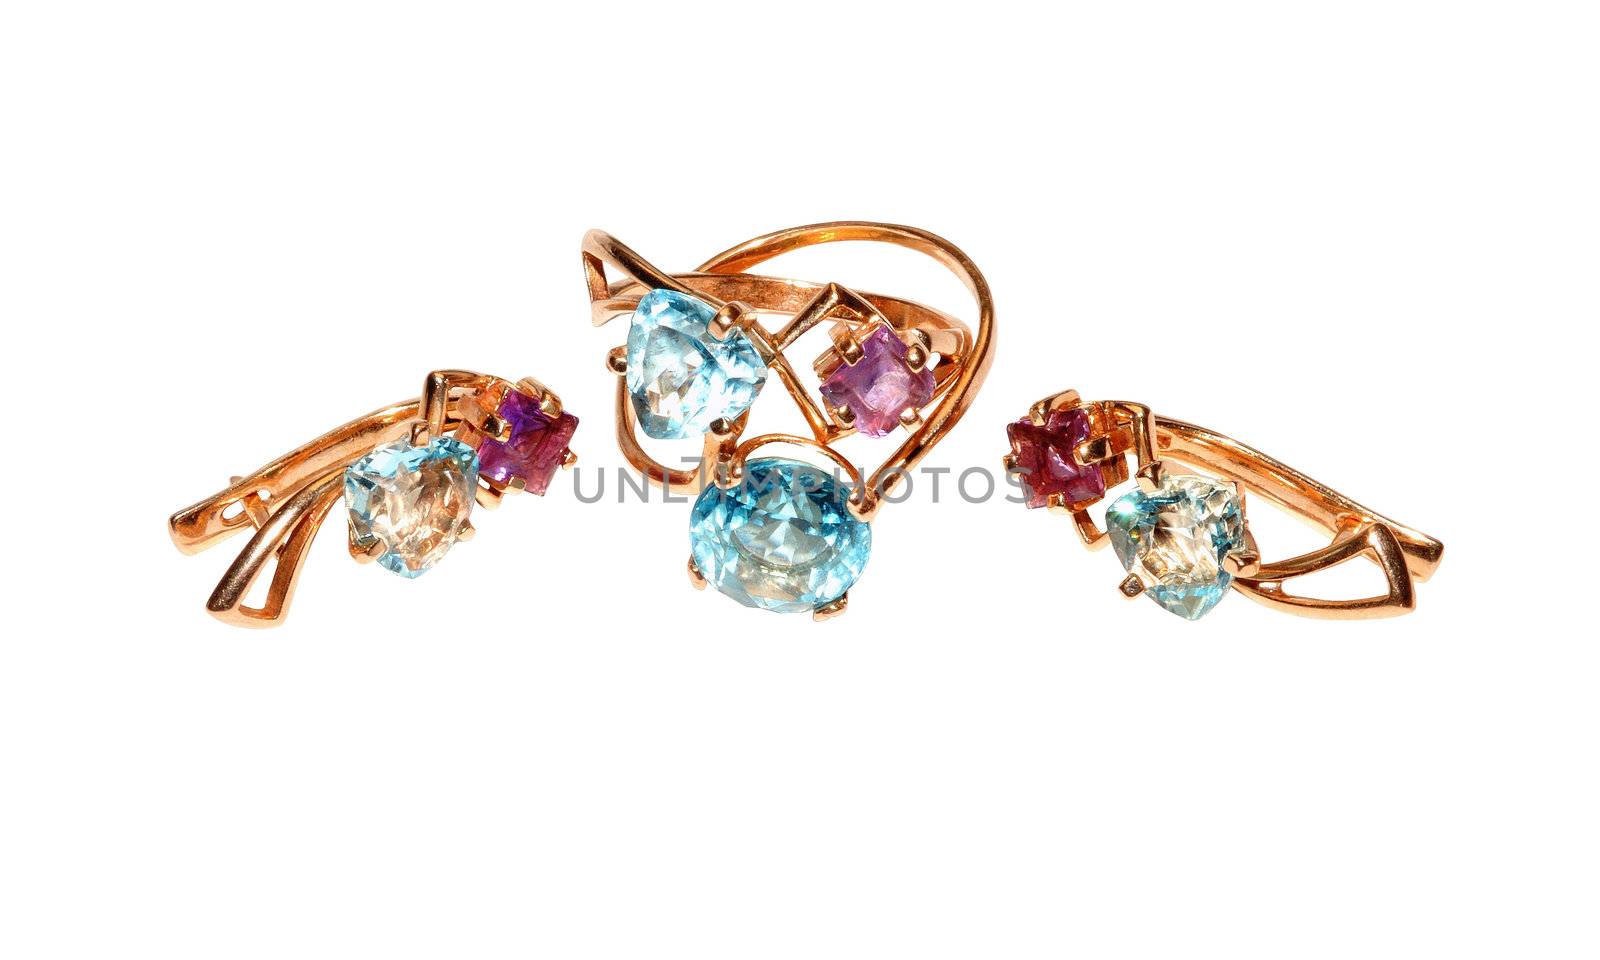 Jewelry with blue topaz and purple amethyst 